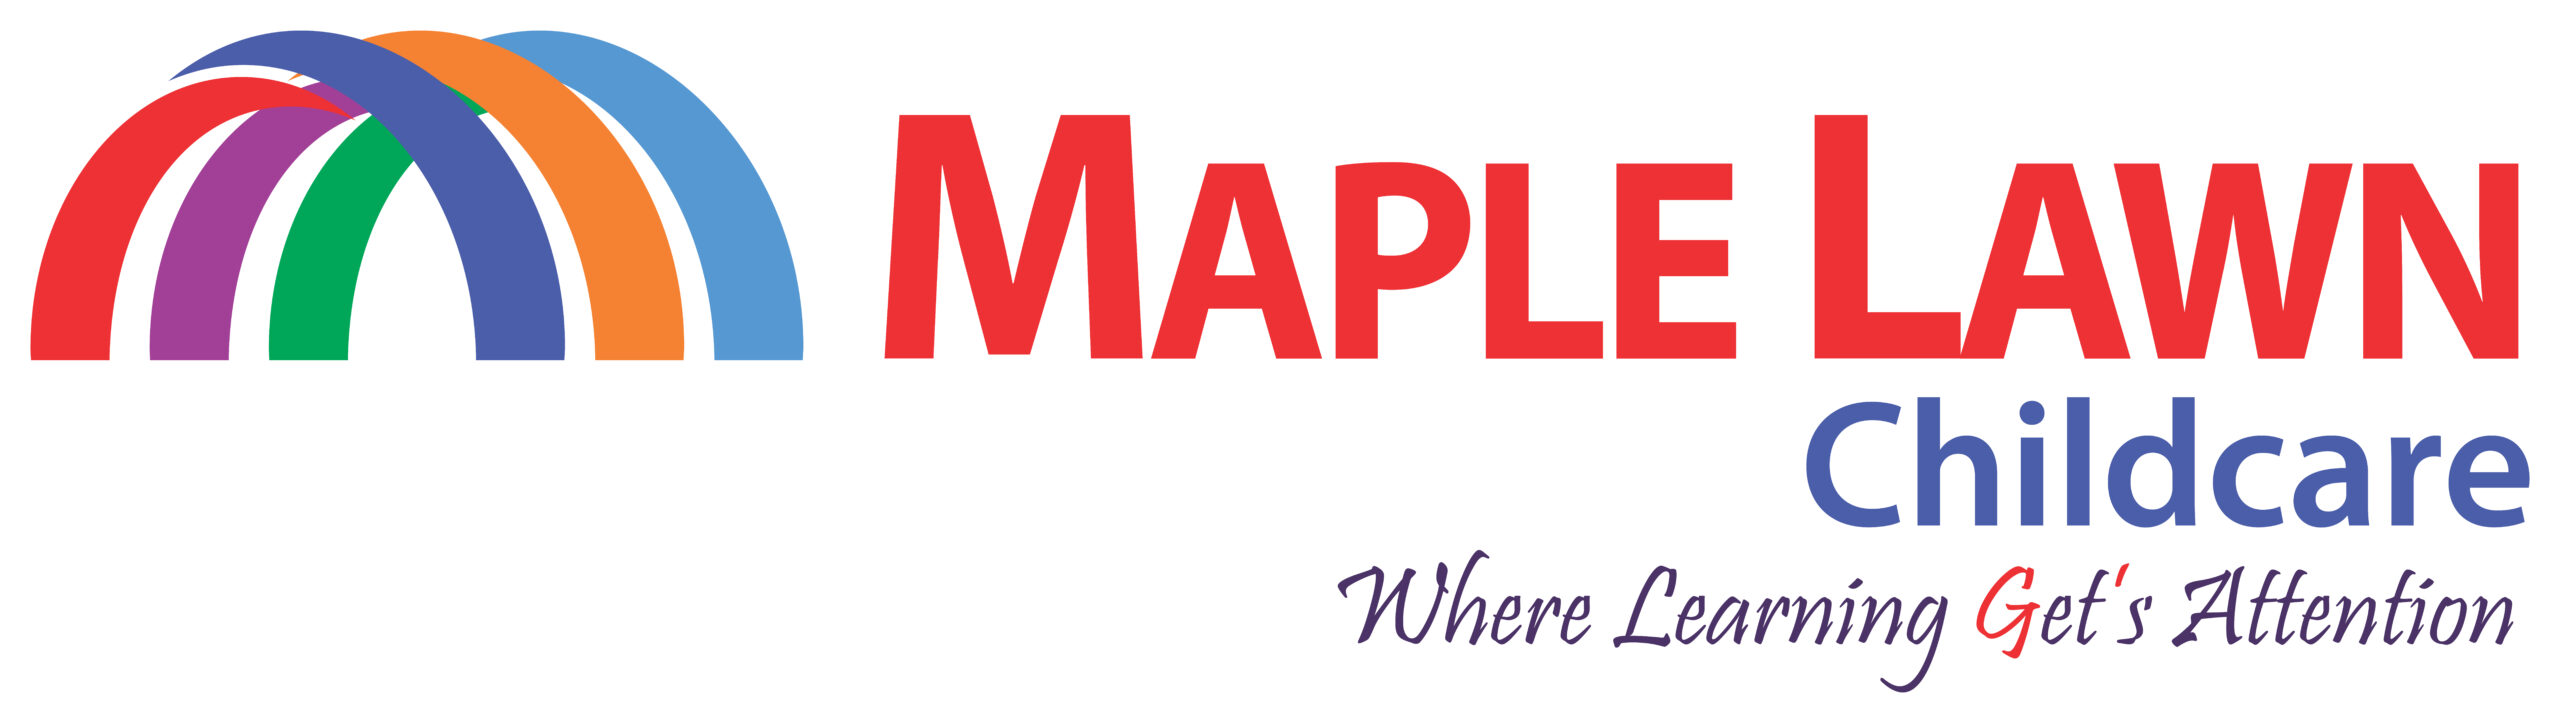 Maplelawn Childcare